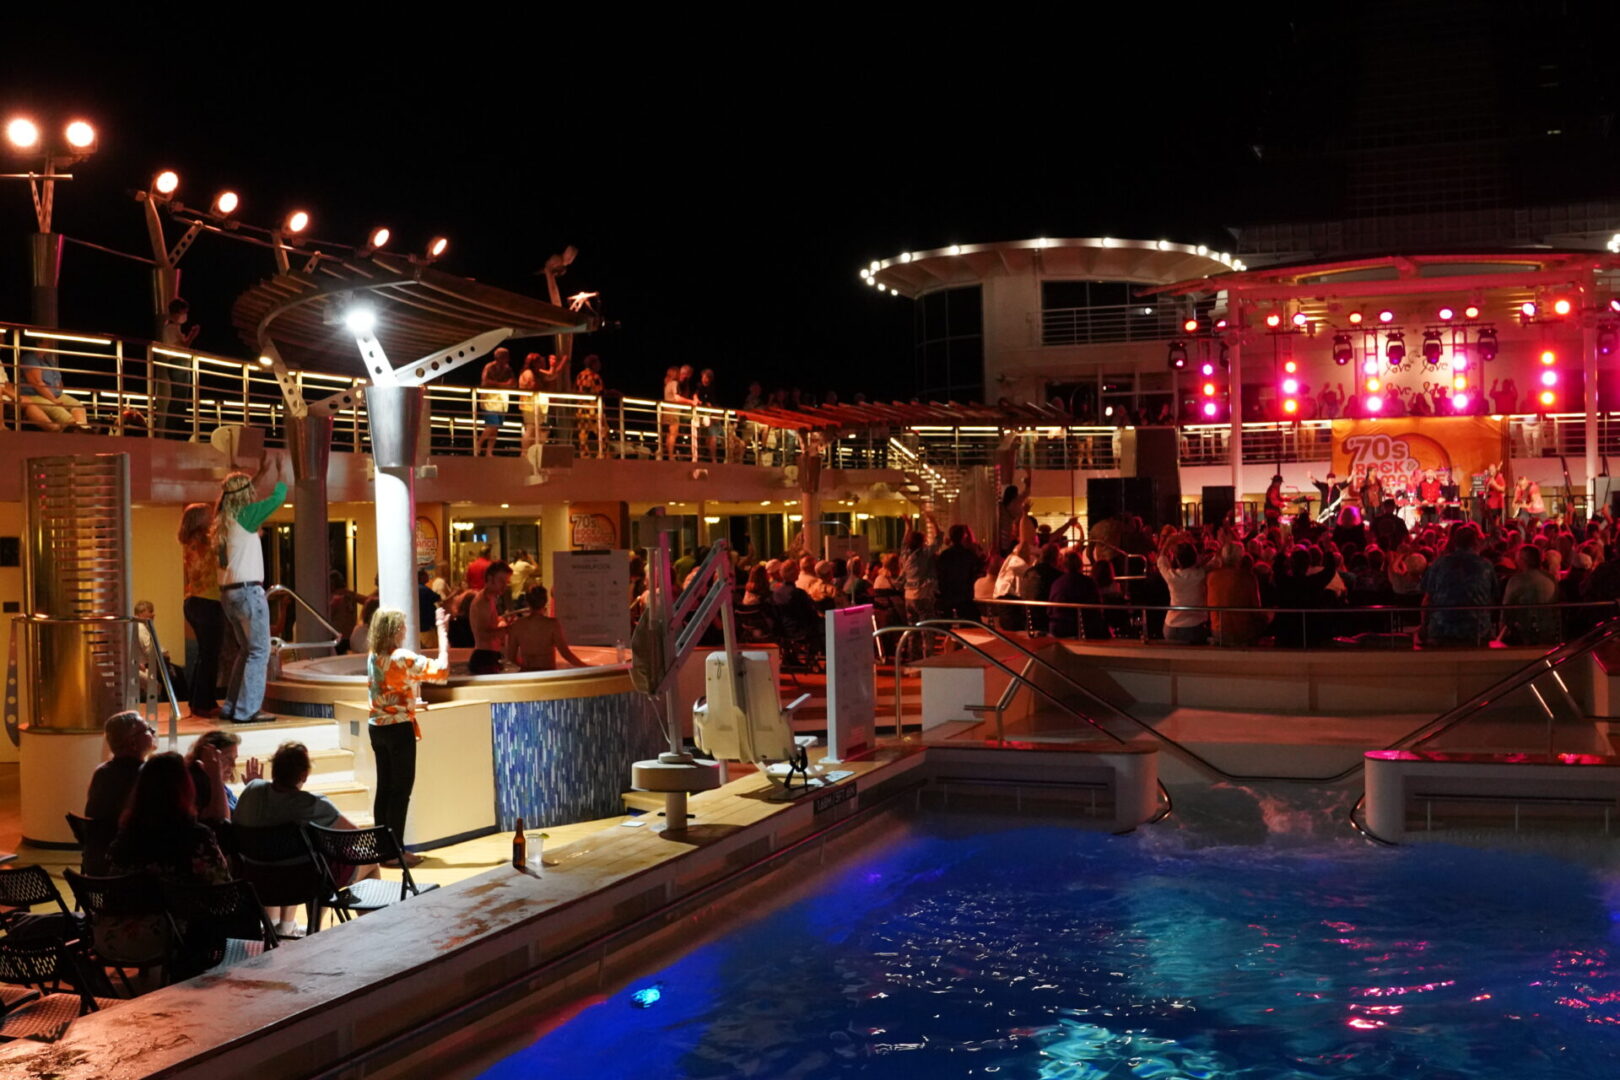 A pool with people sitting at it and a bar in the background.